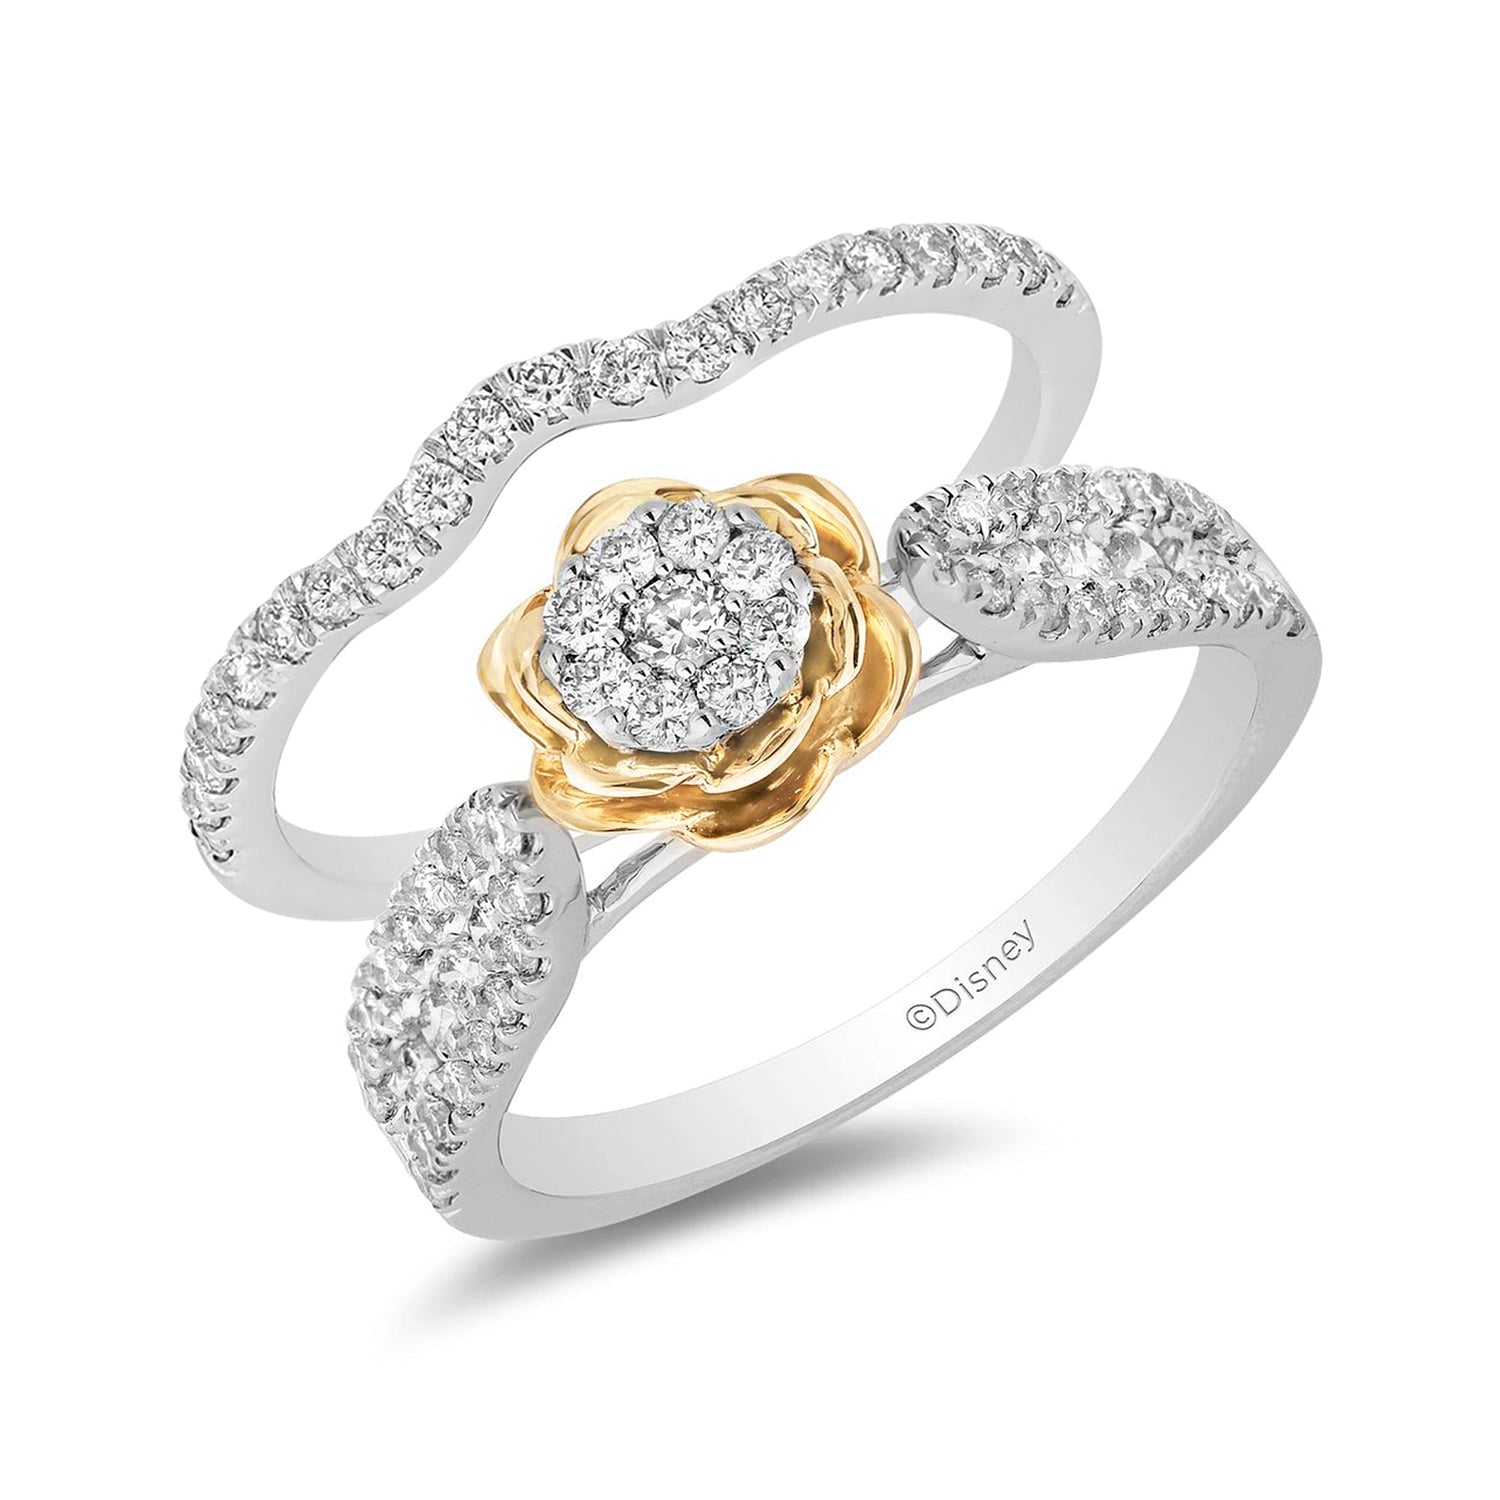 jewelry for women Exquisite Hollow Out Ring Women Engagement Wedding  Jewelry Accessories Gift - Walmart.com